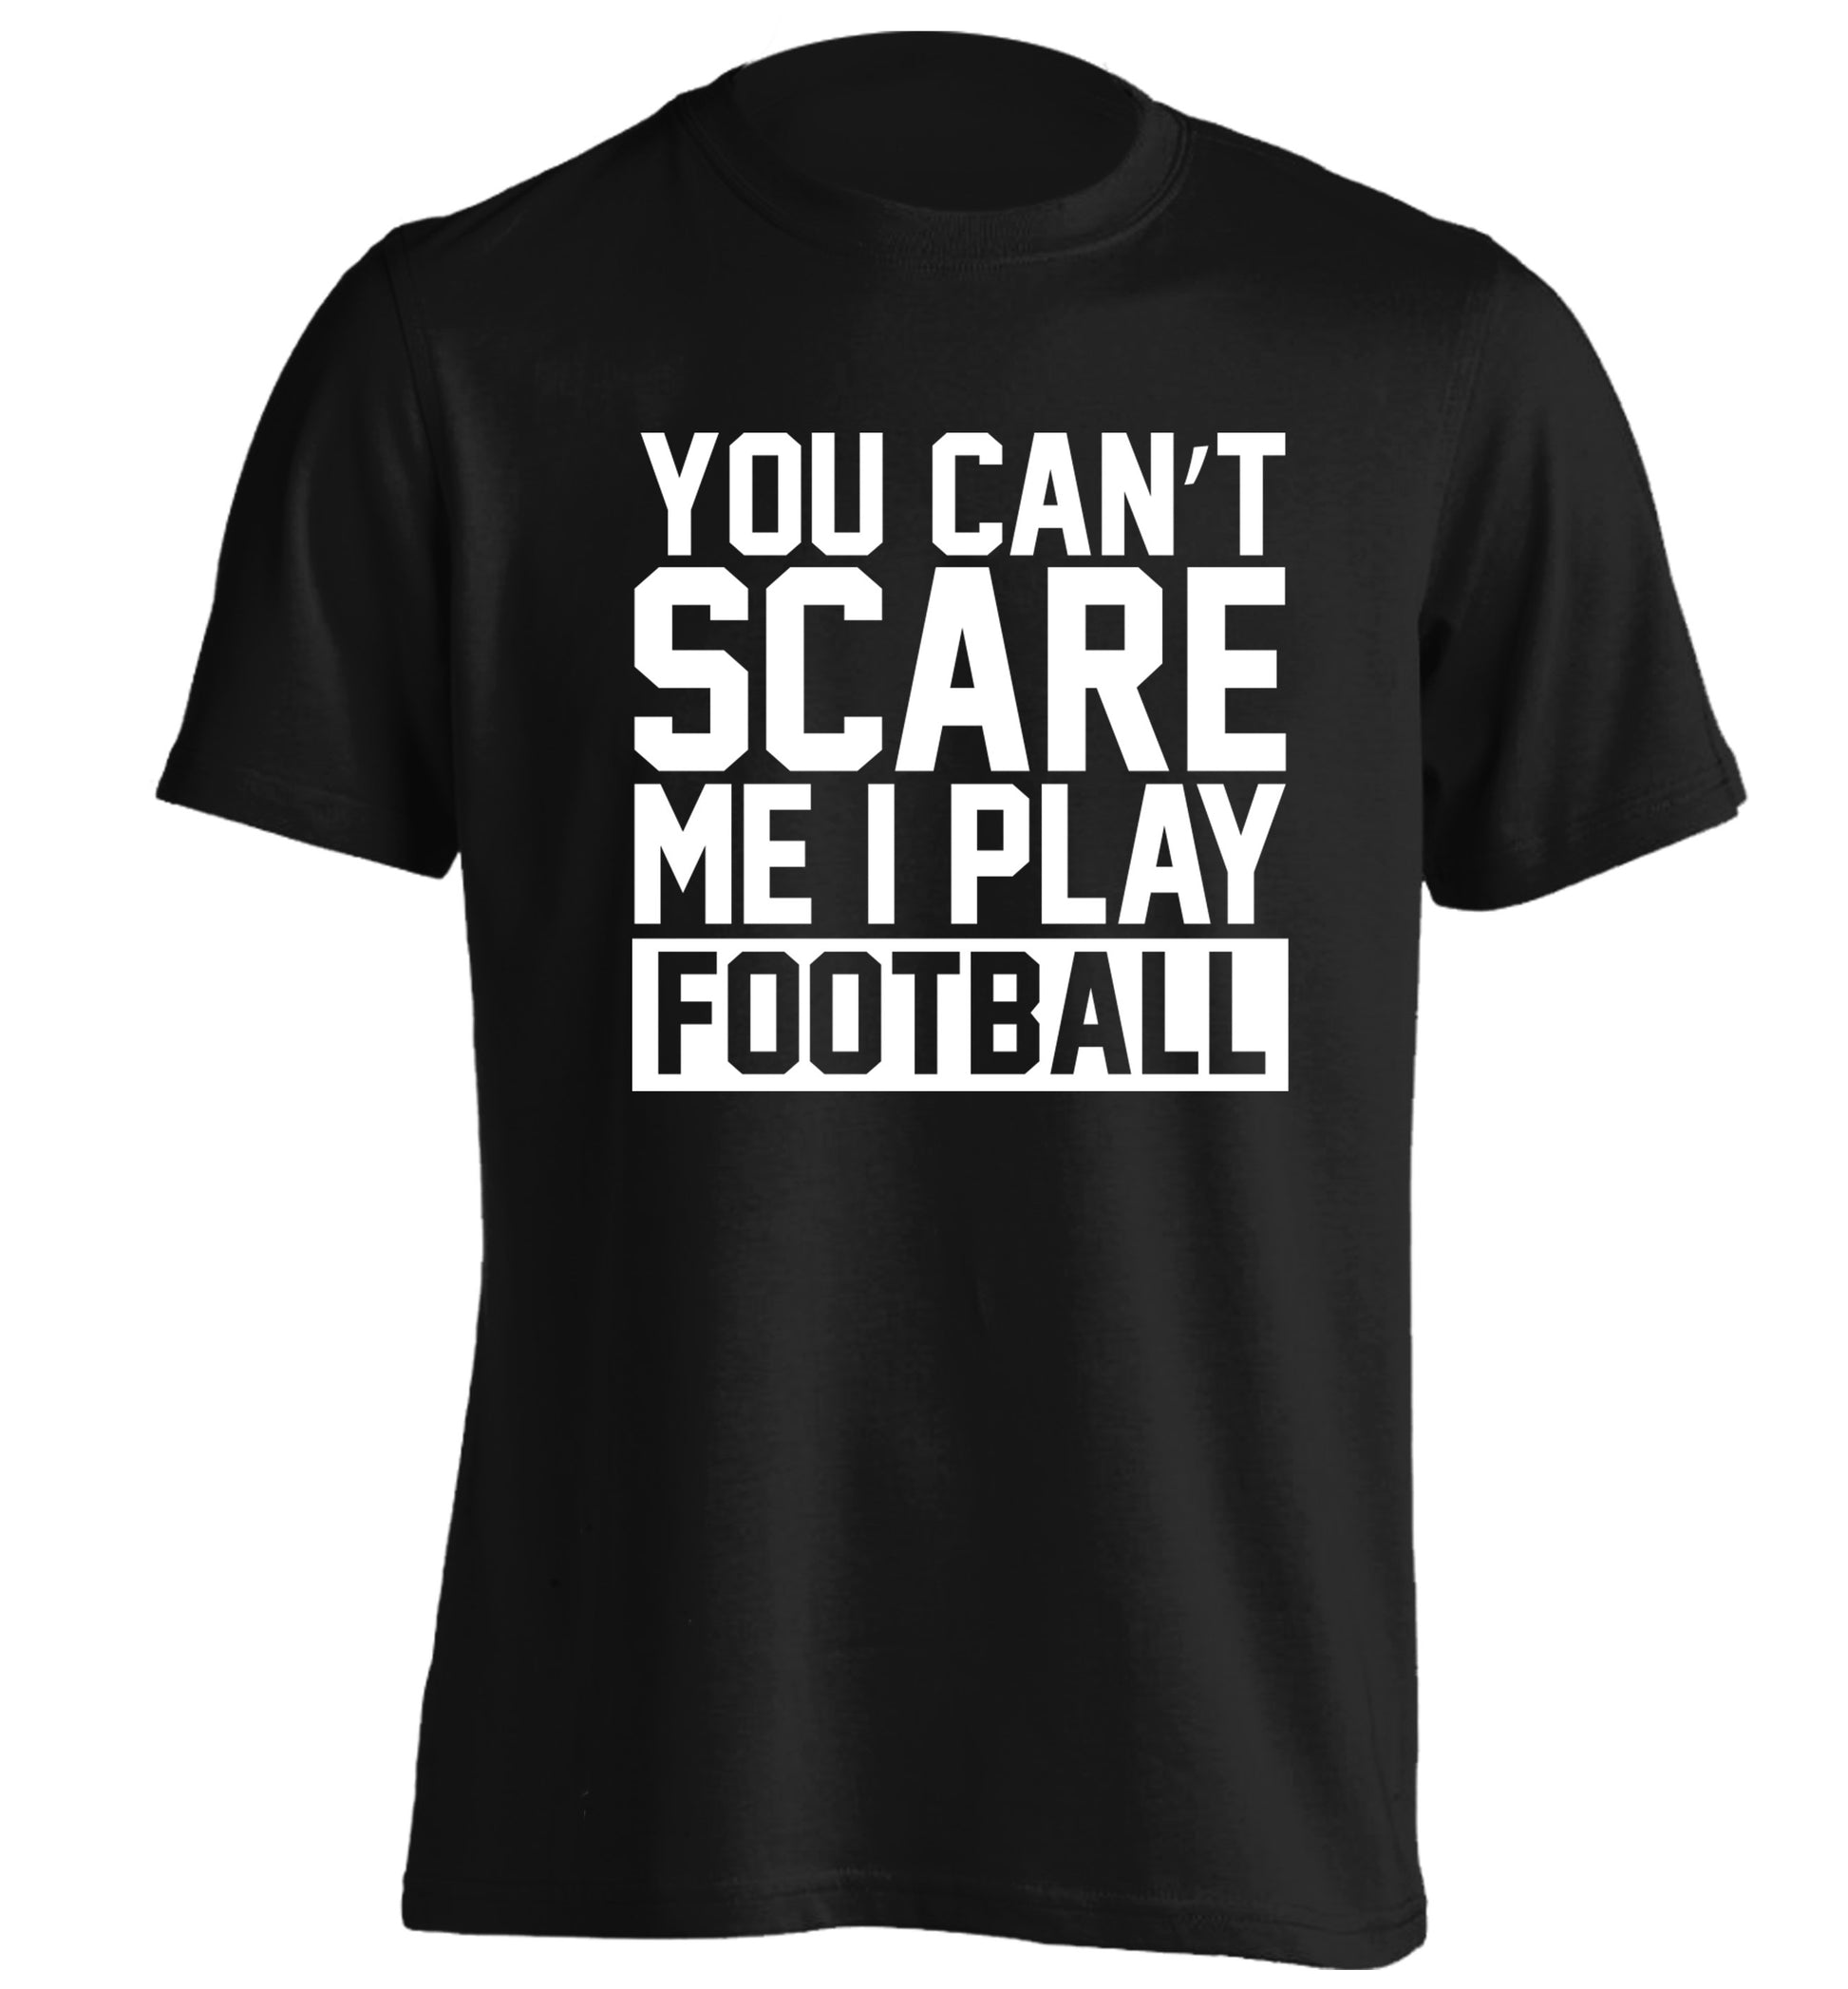 You can't scare me I play football adults unisex black Tshirt 2XL